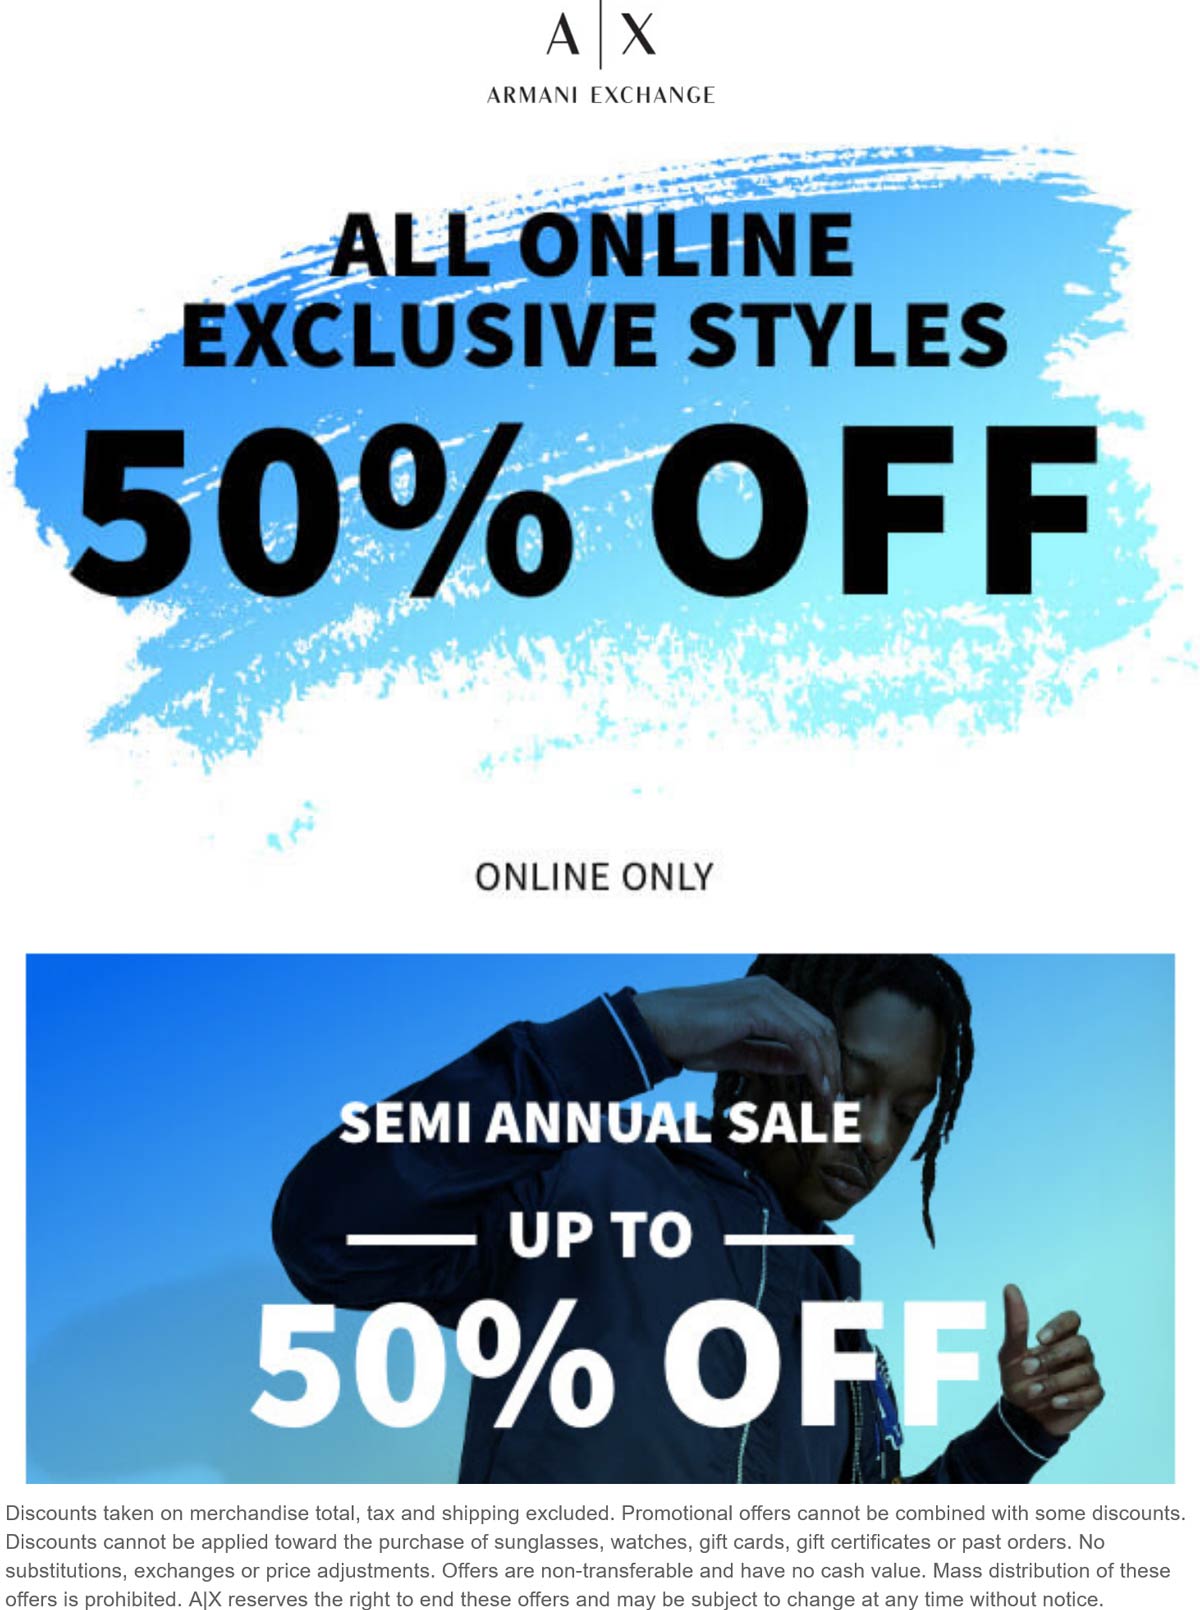 Armani Exchange stores Coupon  50% off online styles at Armani Exchange #armaniexchange 